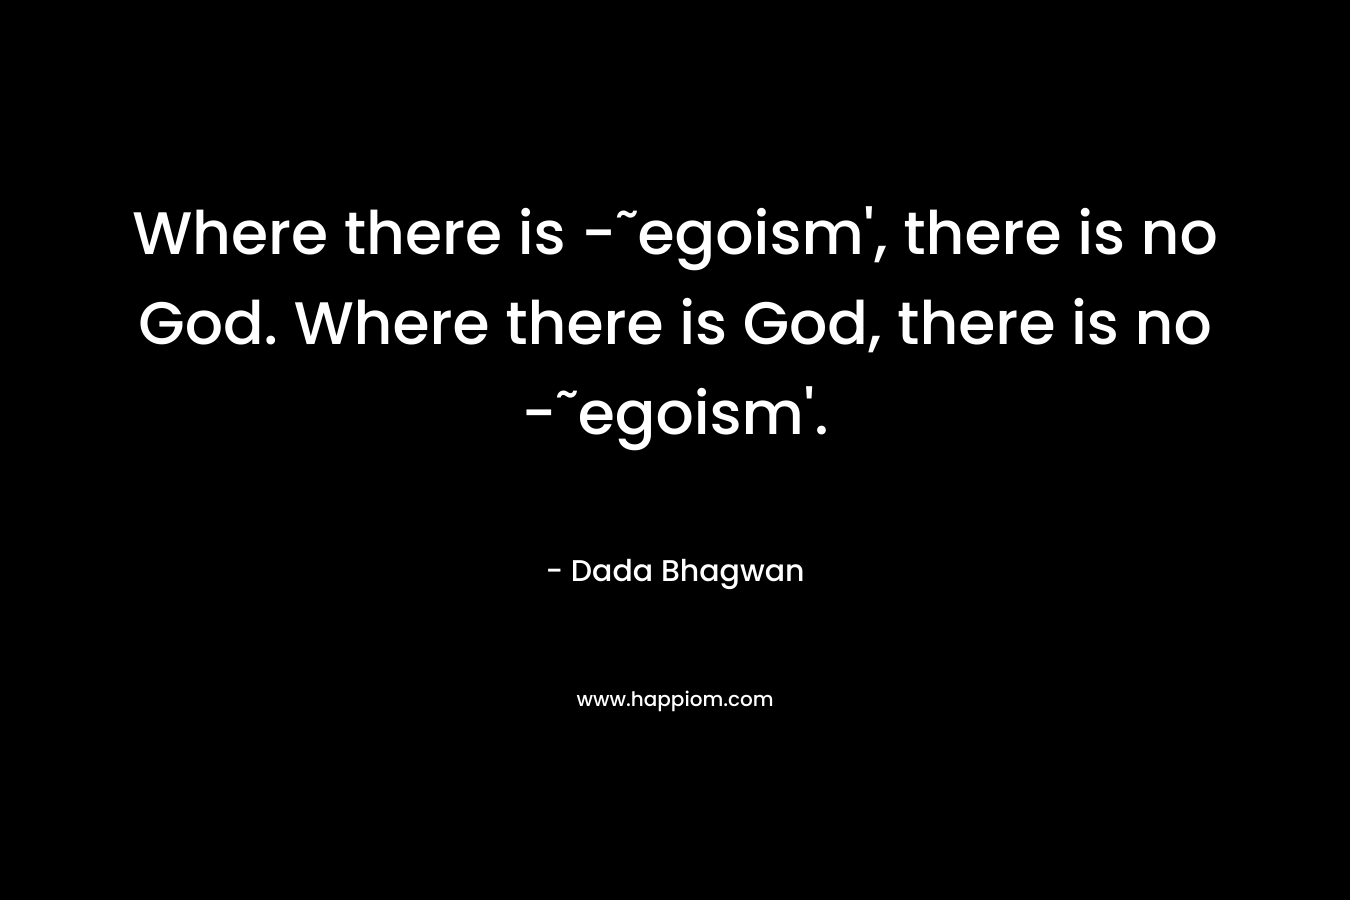 Where there is -˜egoism', there is no God. Where there is God, there is no -˜egoism'.